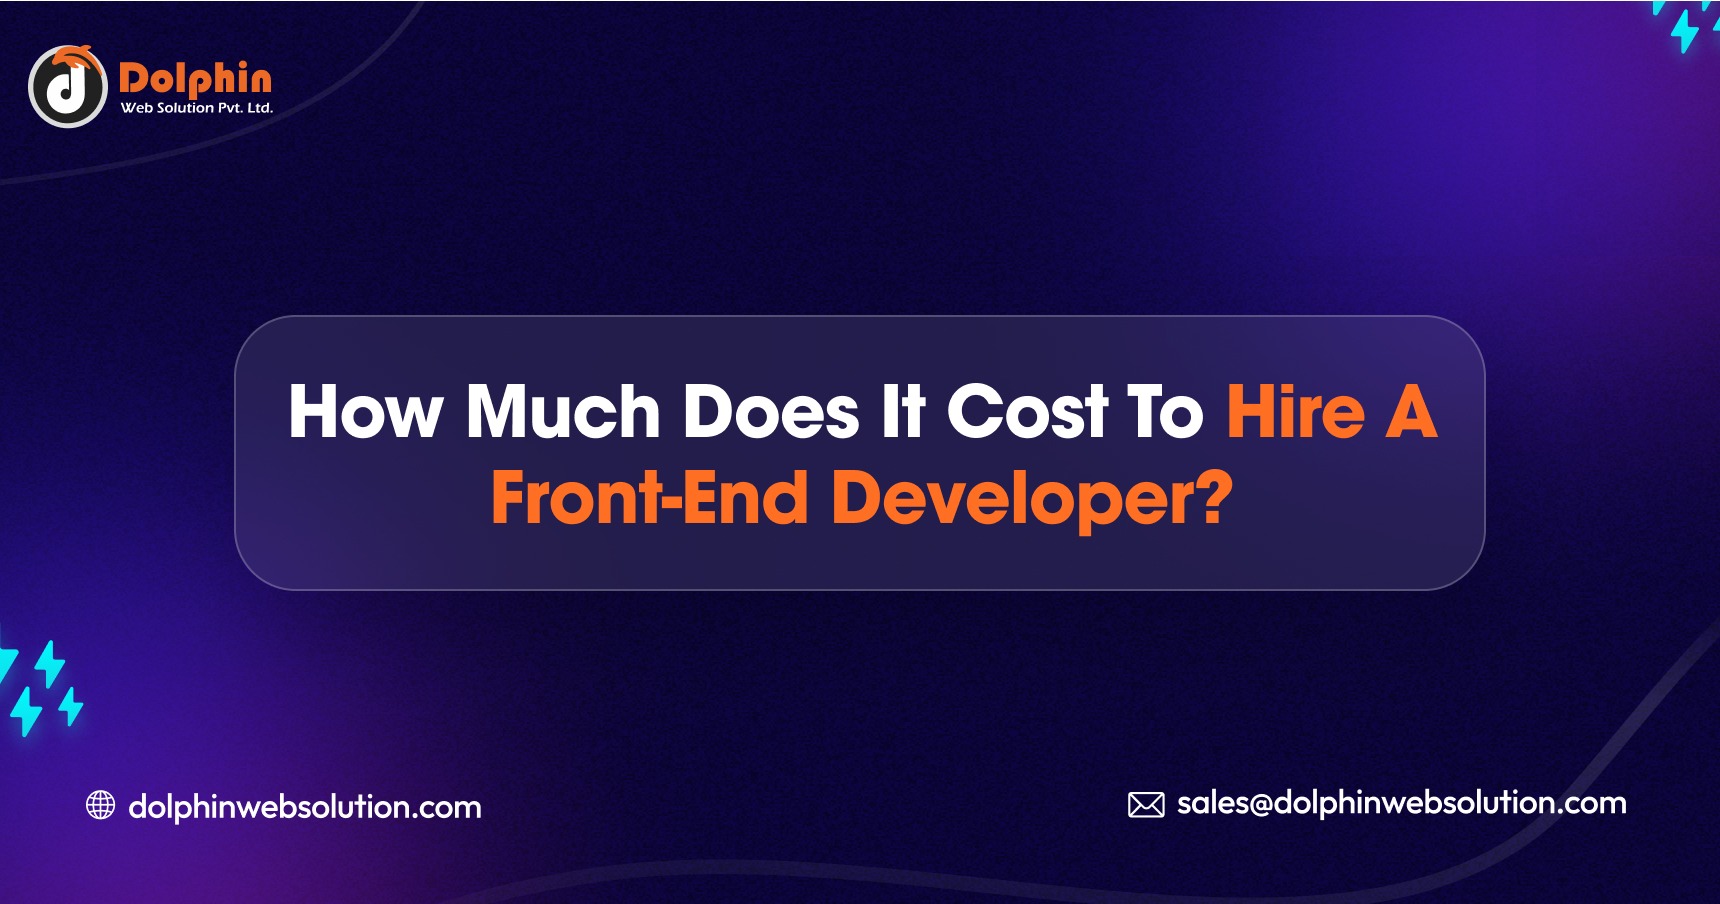 How Much Does It Cost To Hire a Front-end Developer?